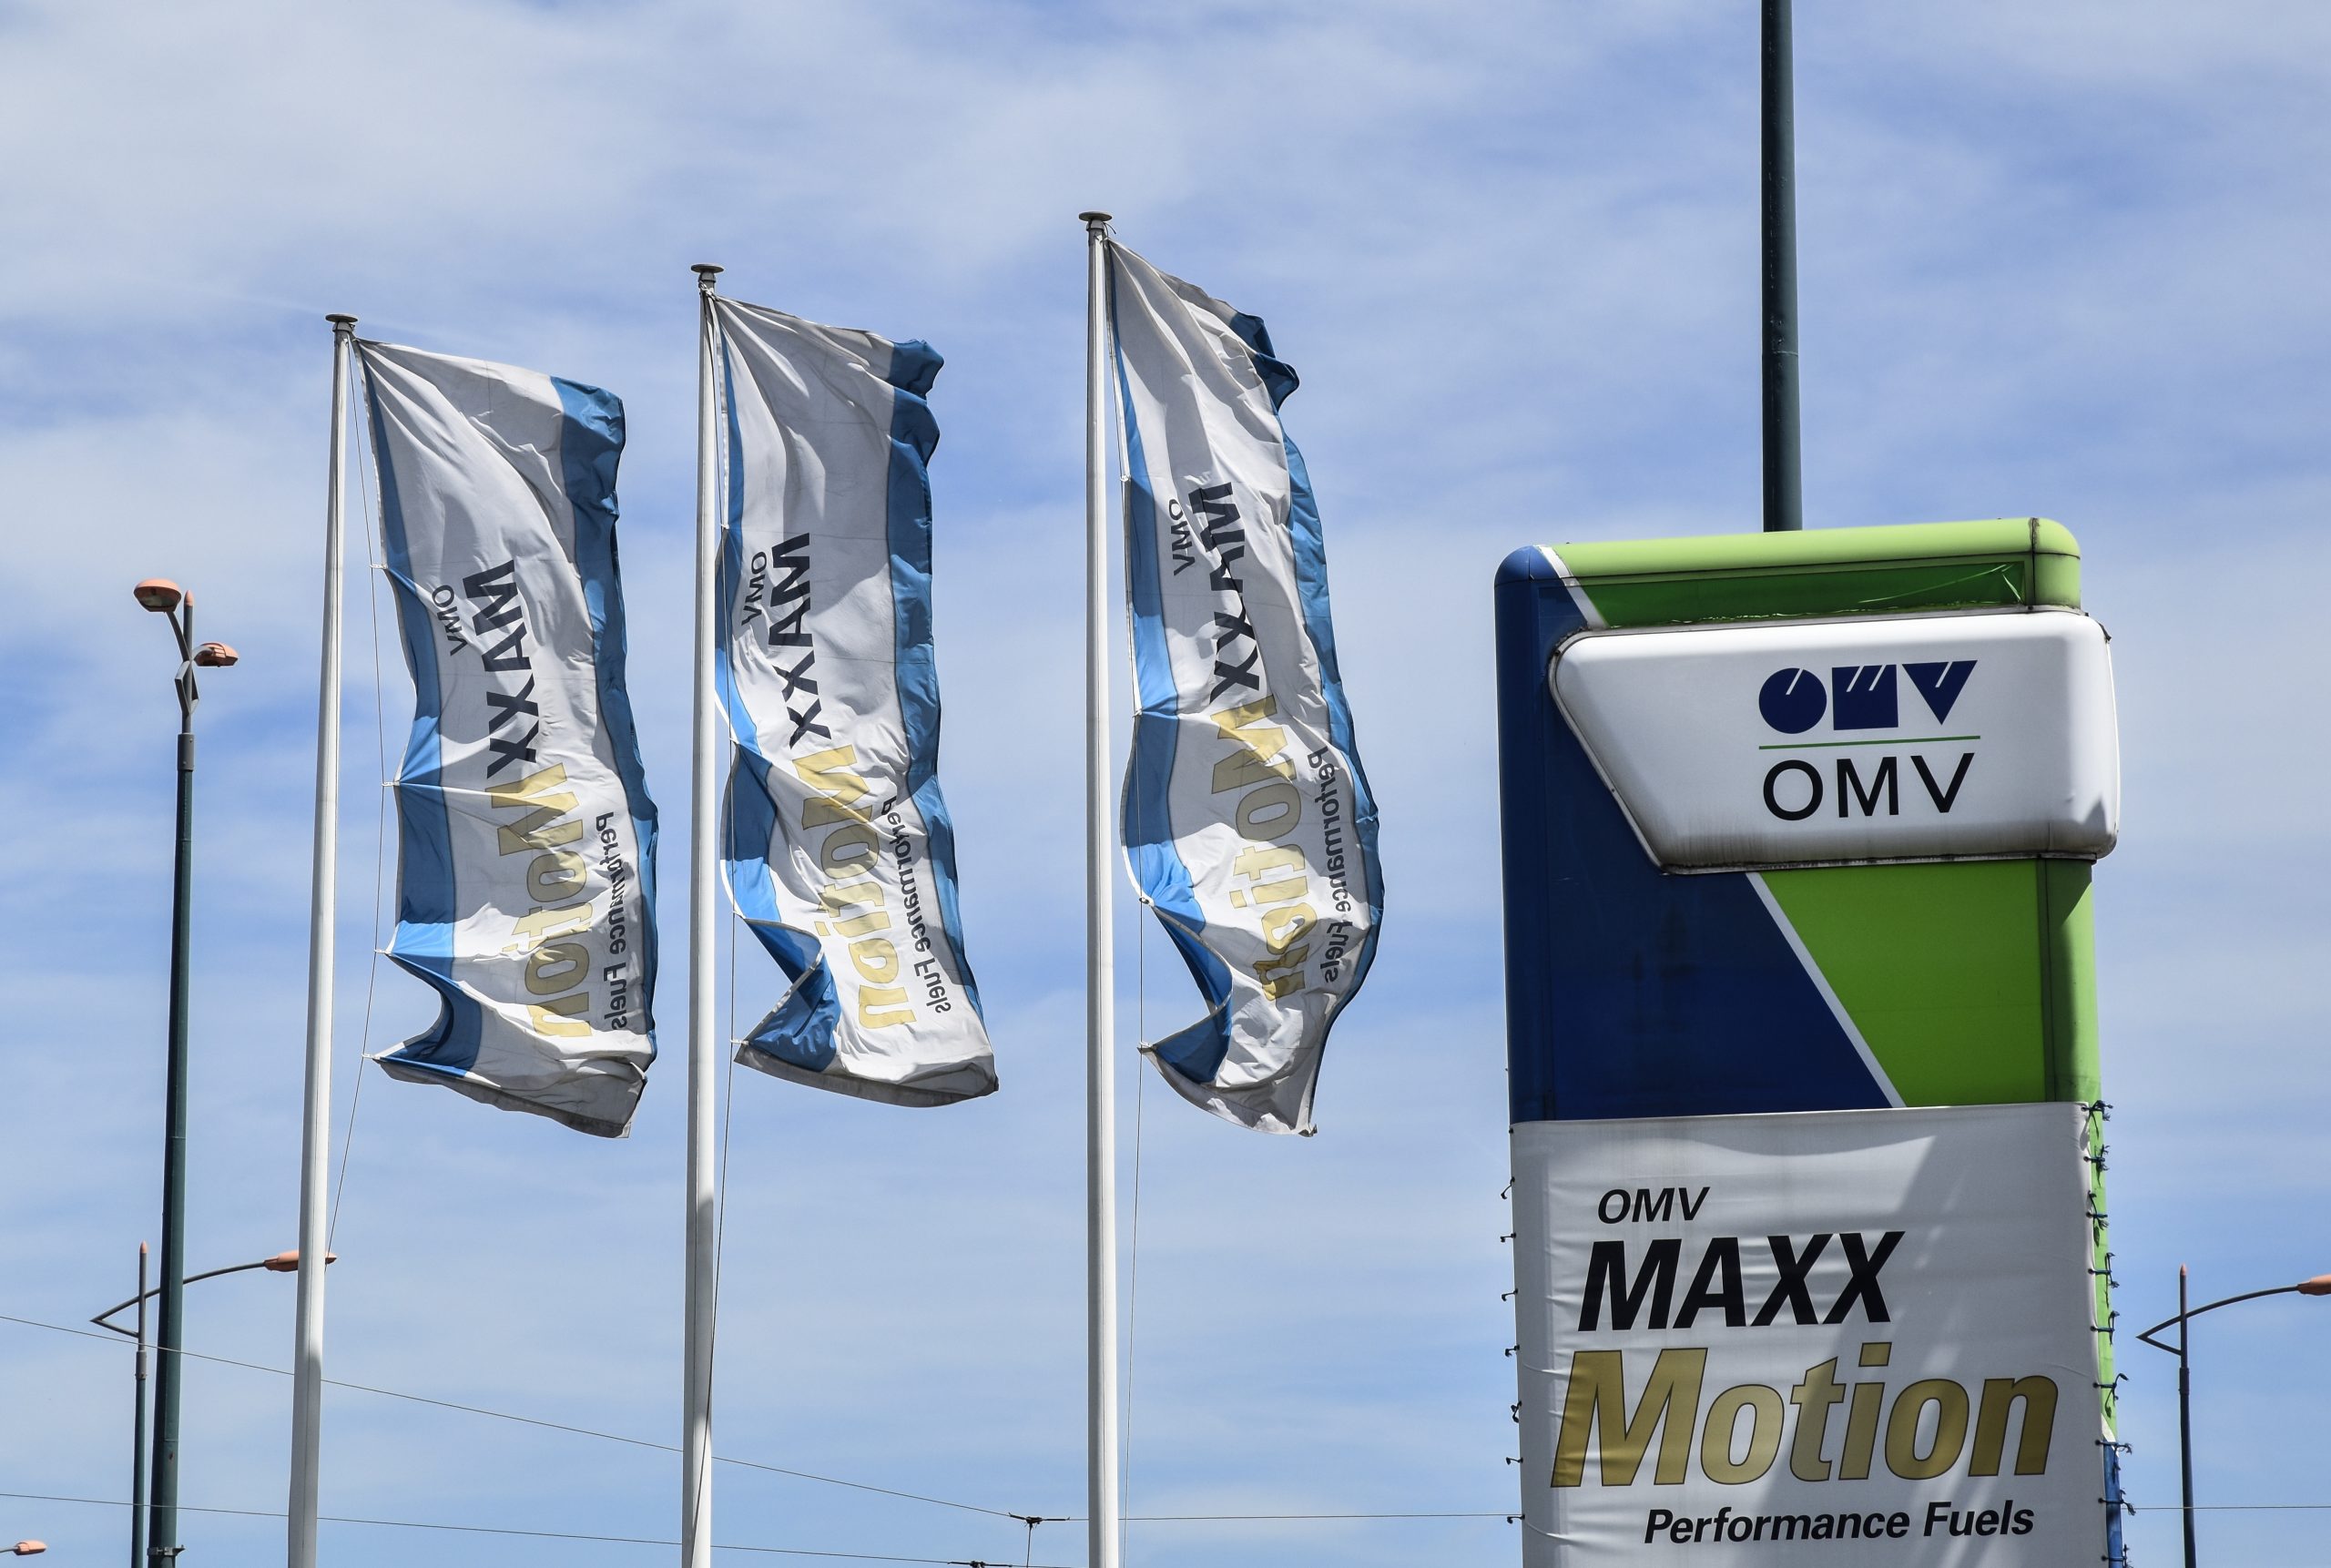 Oil and Gas Analyst: Hungarian Gasoline Inventories Not Only Support OMV, but also MOL